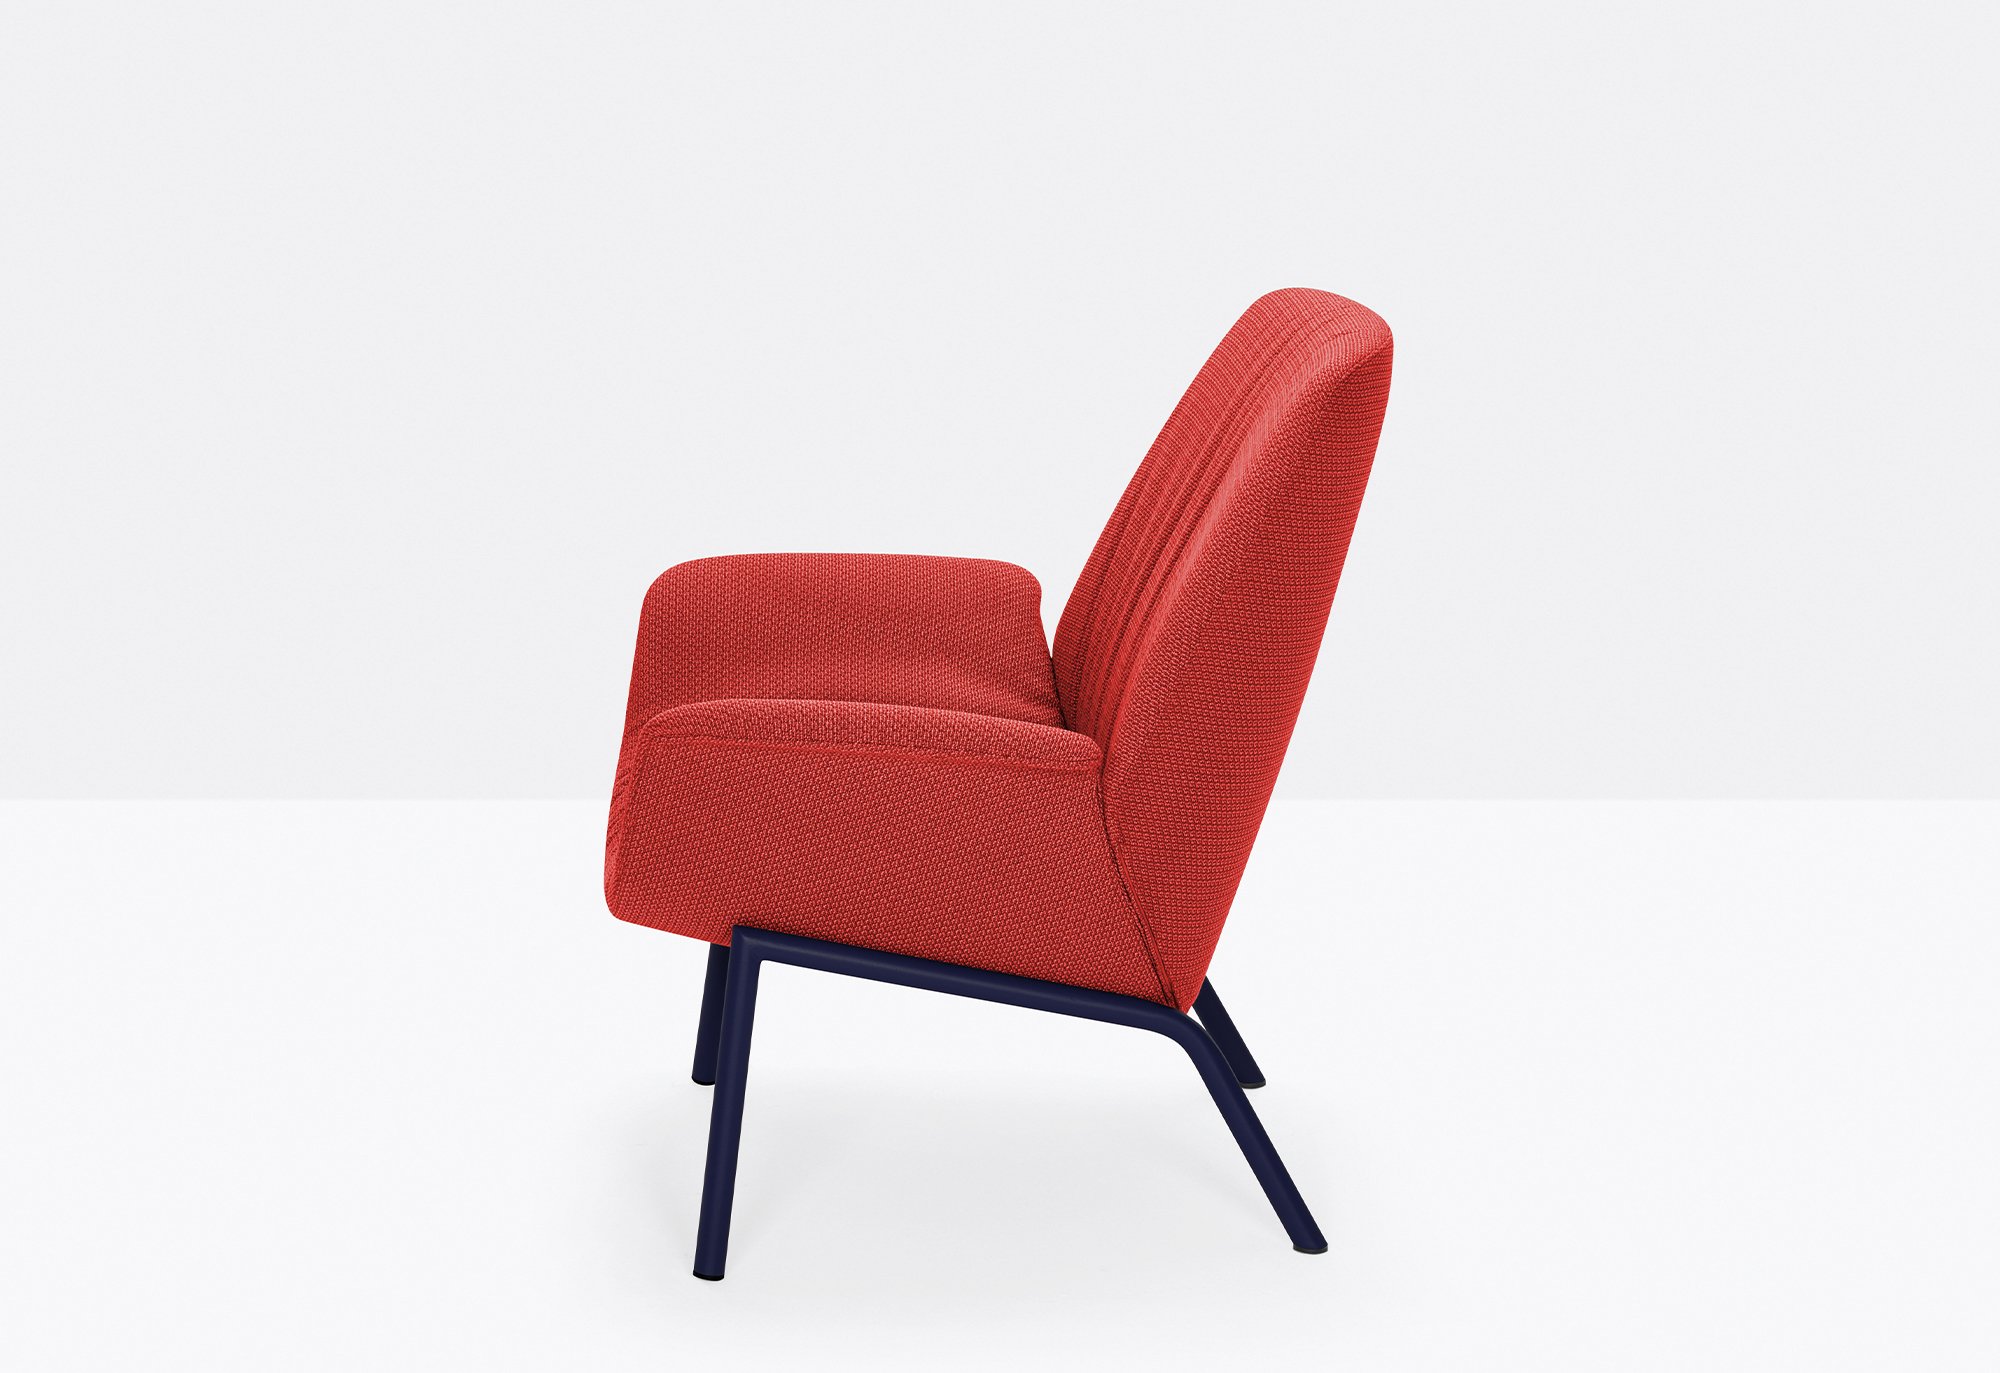 ILA Armchair lounge from Pedrali, designed by Patrick Jouin